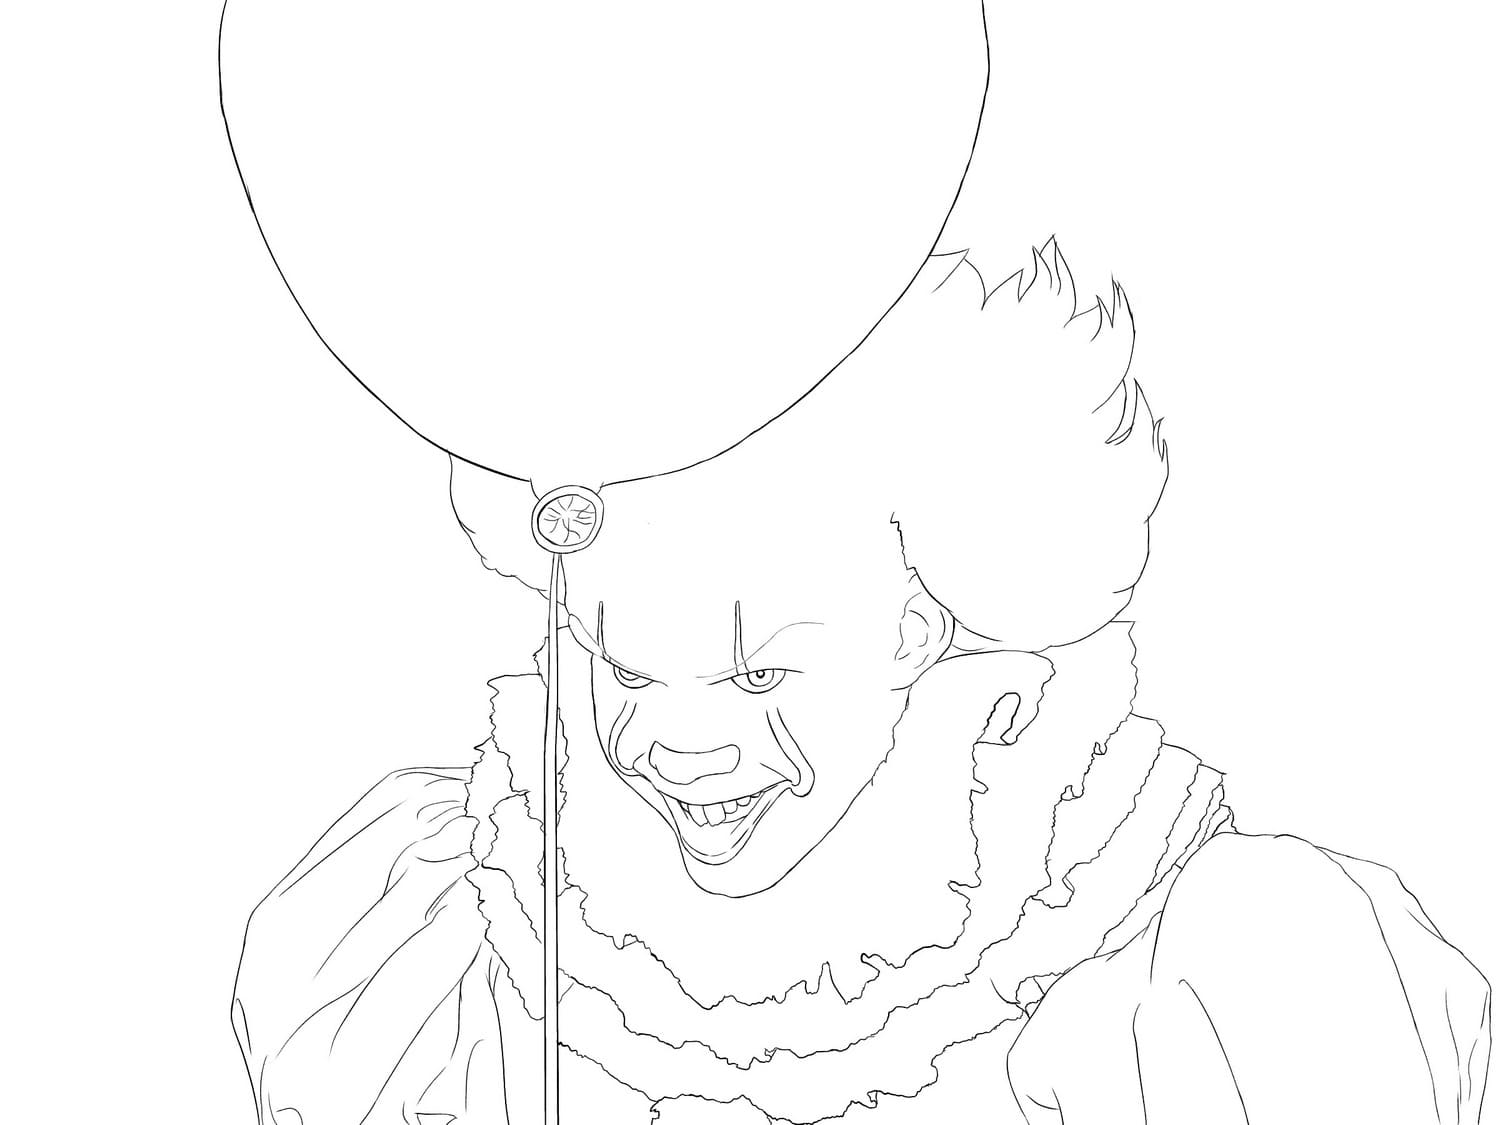 Pennywise with a balloon.